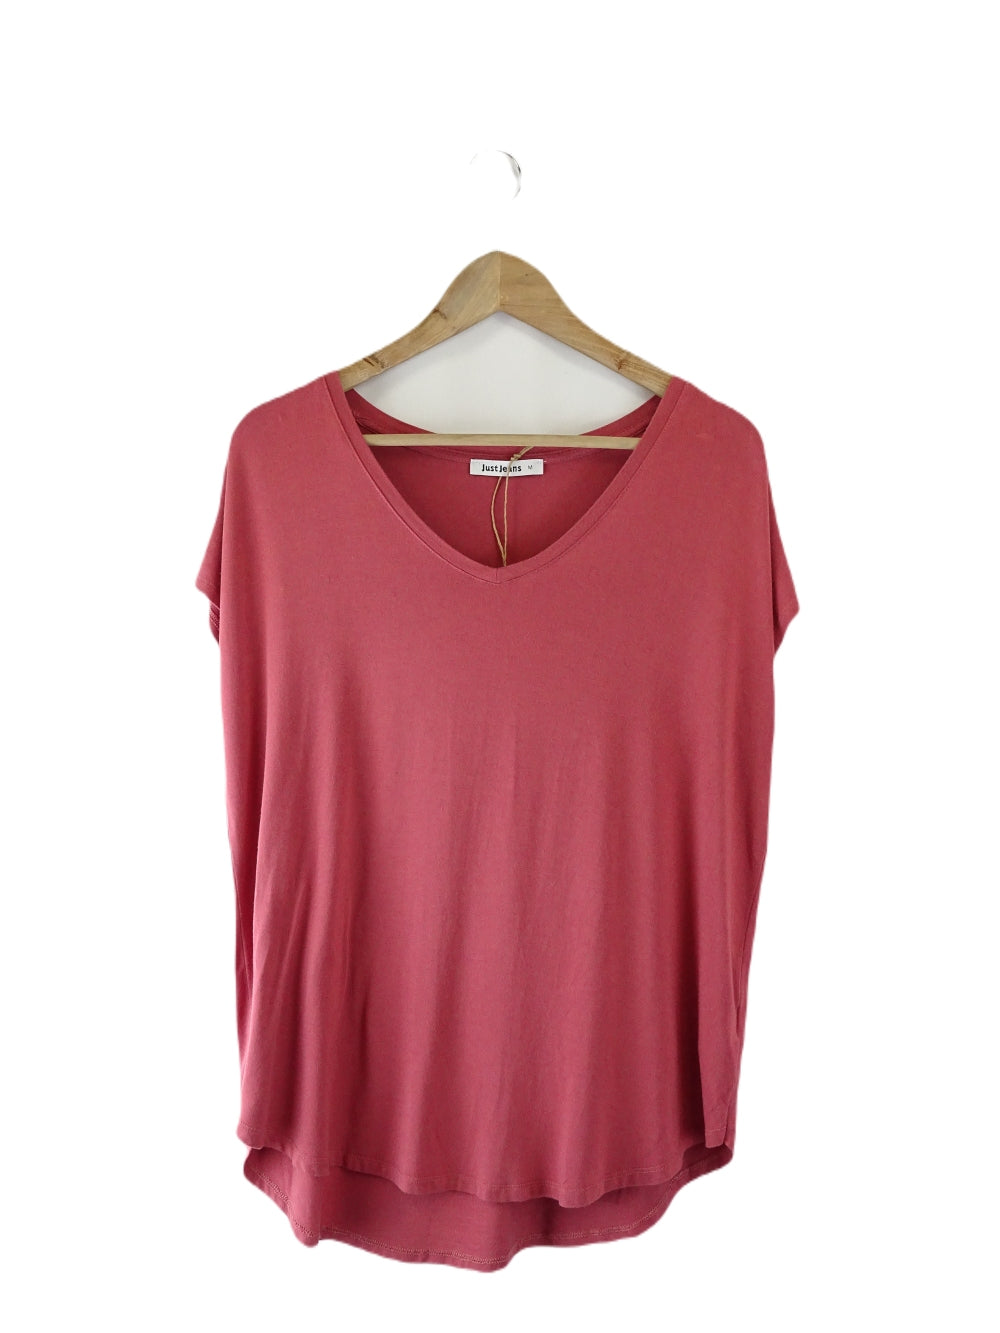 Just Jeans Pink T-shirt M